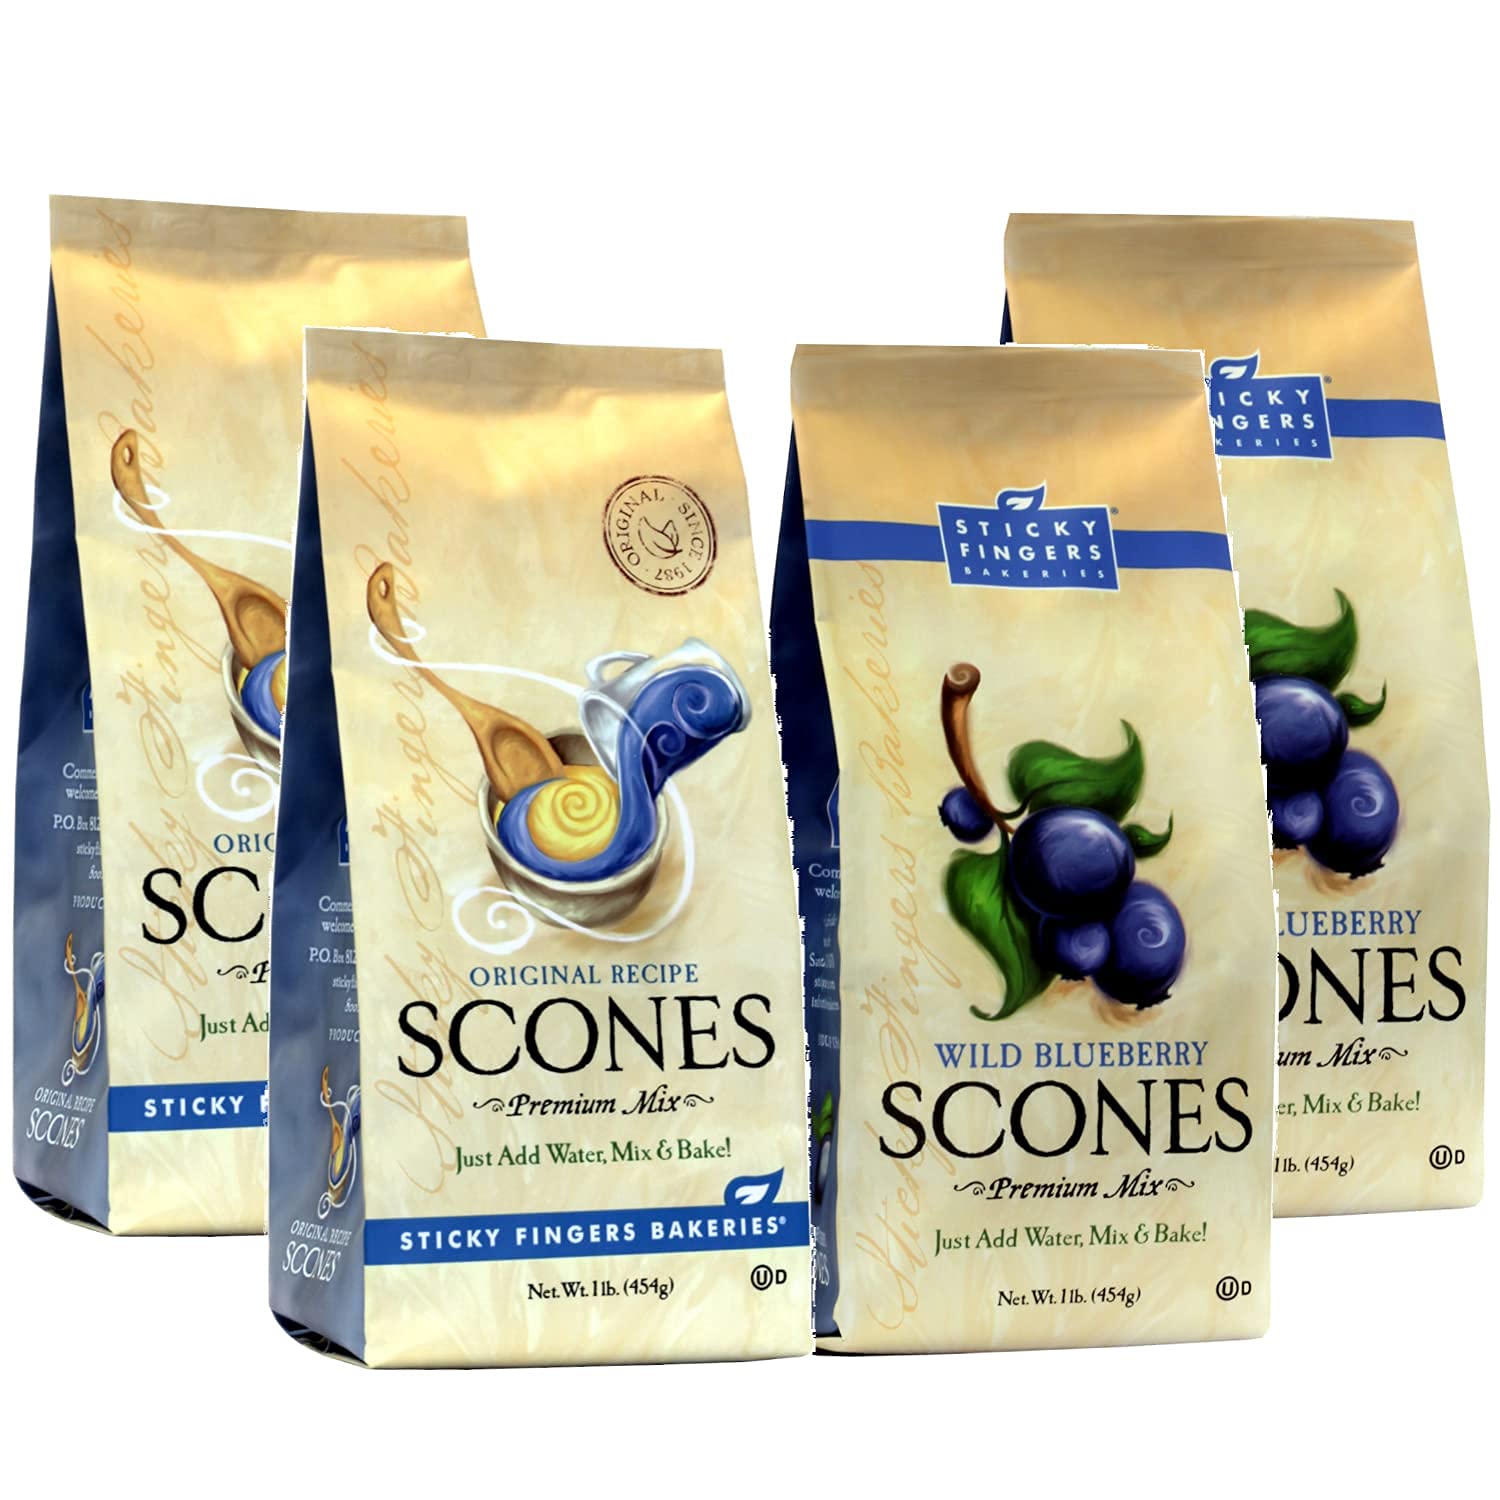 English Scone Mix, Original & Wild Blueberry Bundle by Sticky Fingers Bakeries – Easy to Make English Scones Fresh Baked, Makes 12 Scones (4pk)